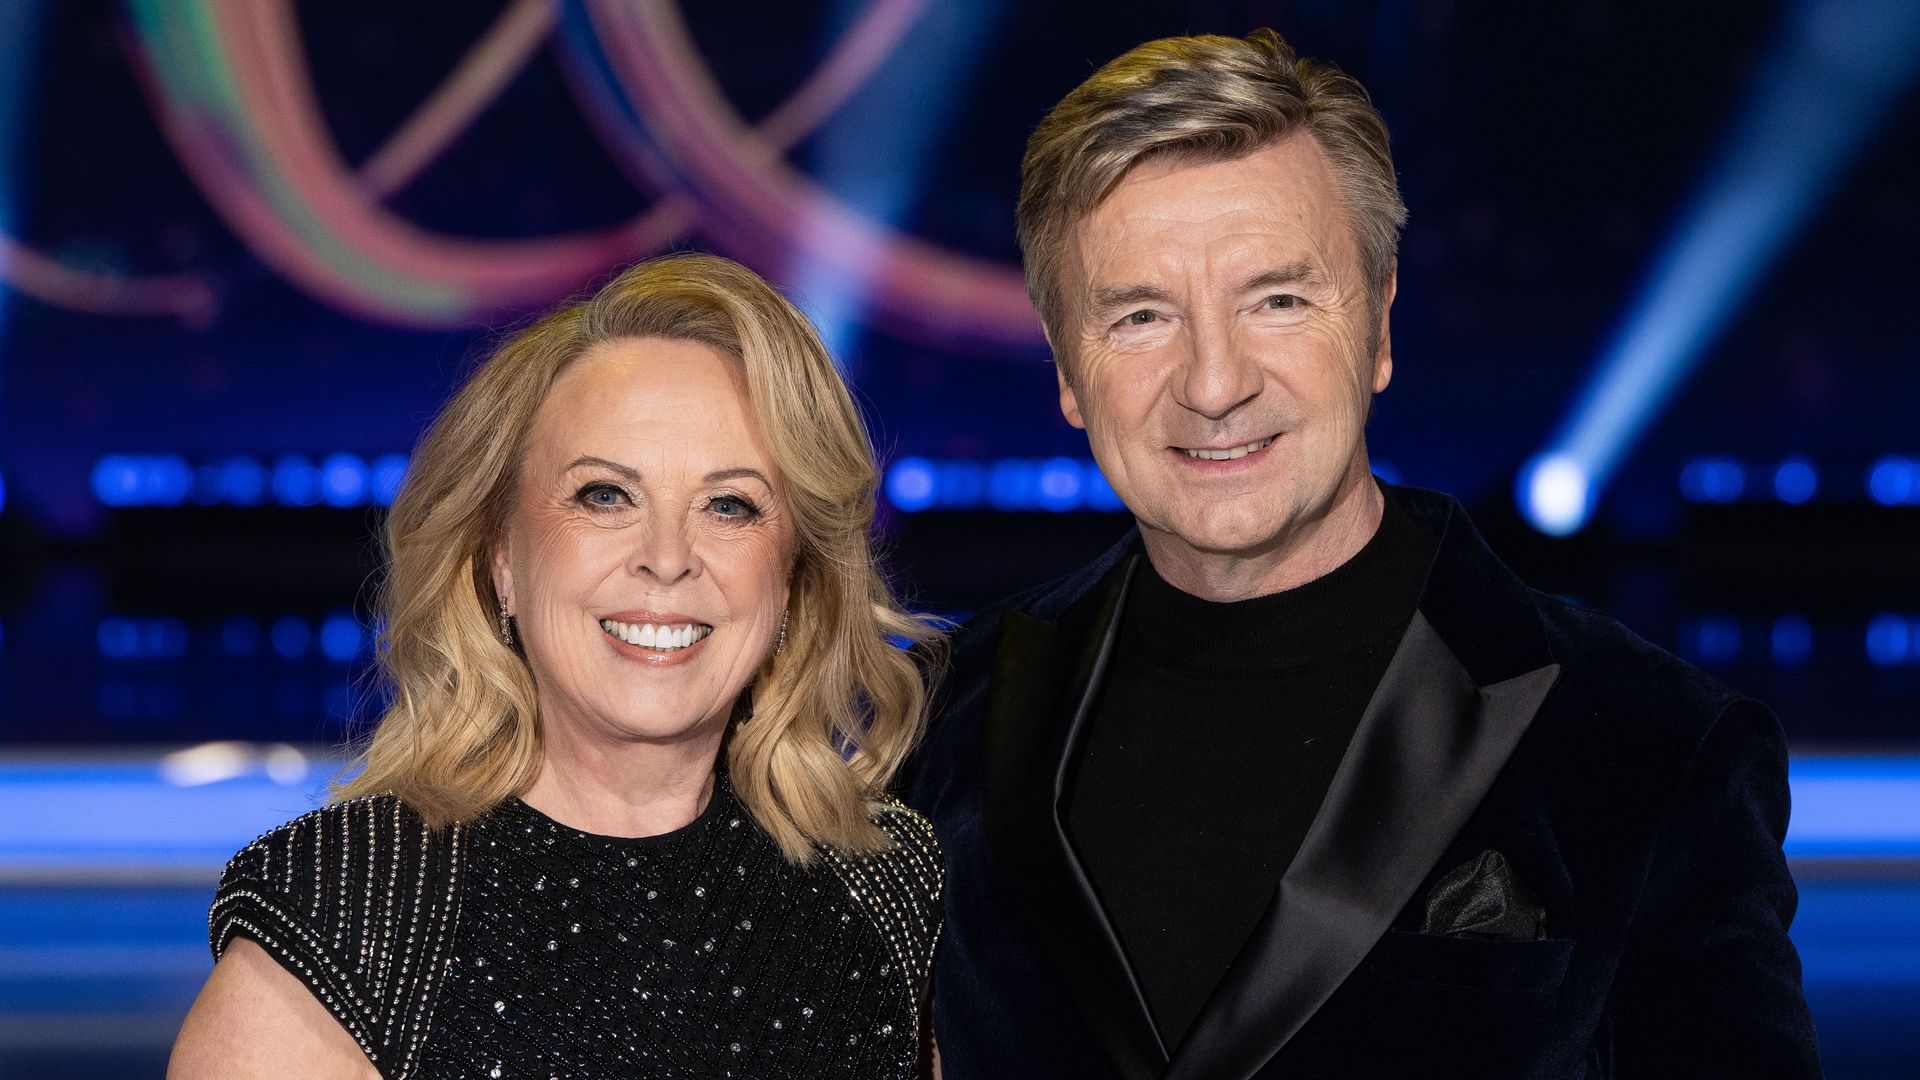 Jayne Torvill and Christopher Dean attend the "Dancing On Ice" photocall at Bovingdon Film Studios on January 10, 2024 in London, England 